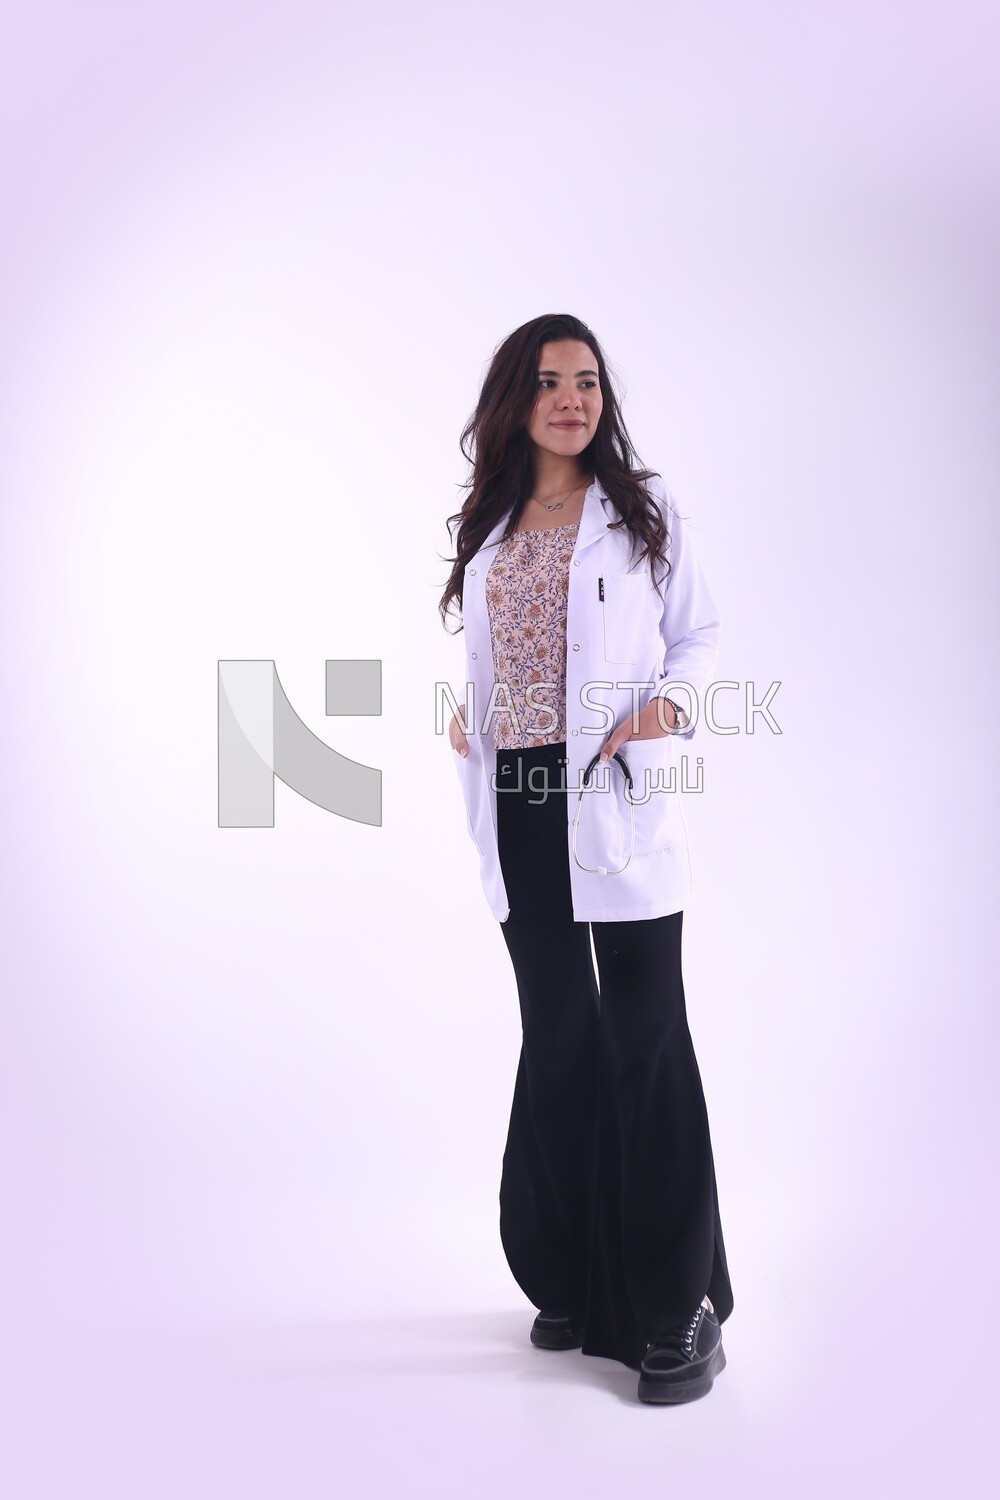 A woman doctor wearing a white coat